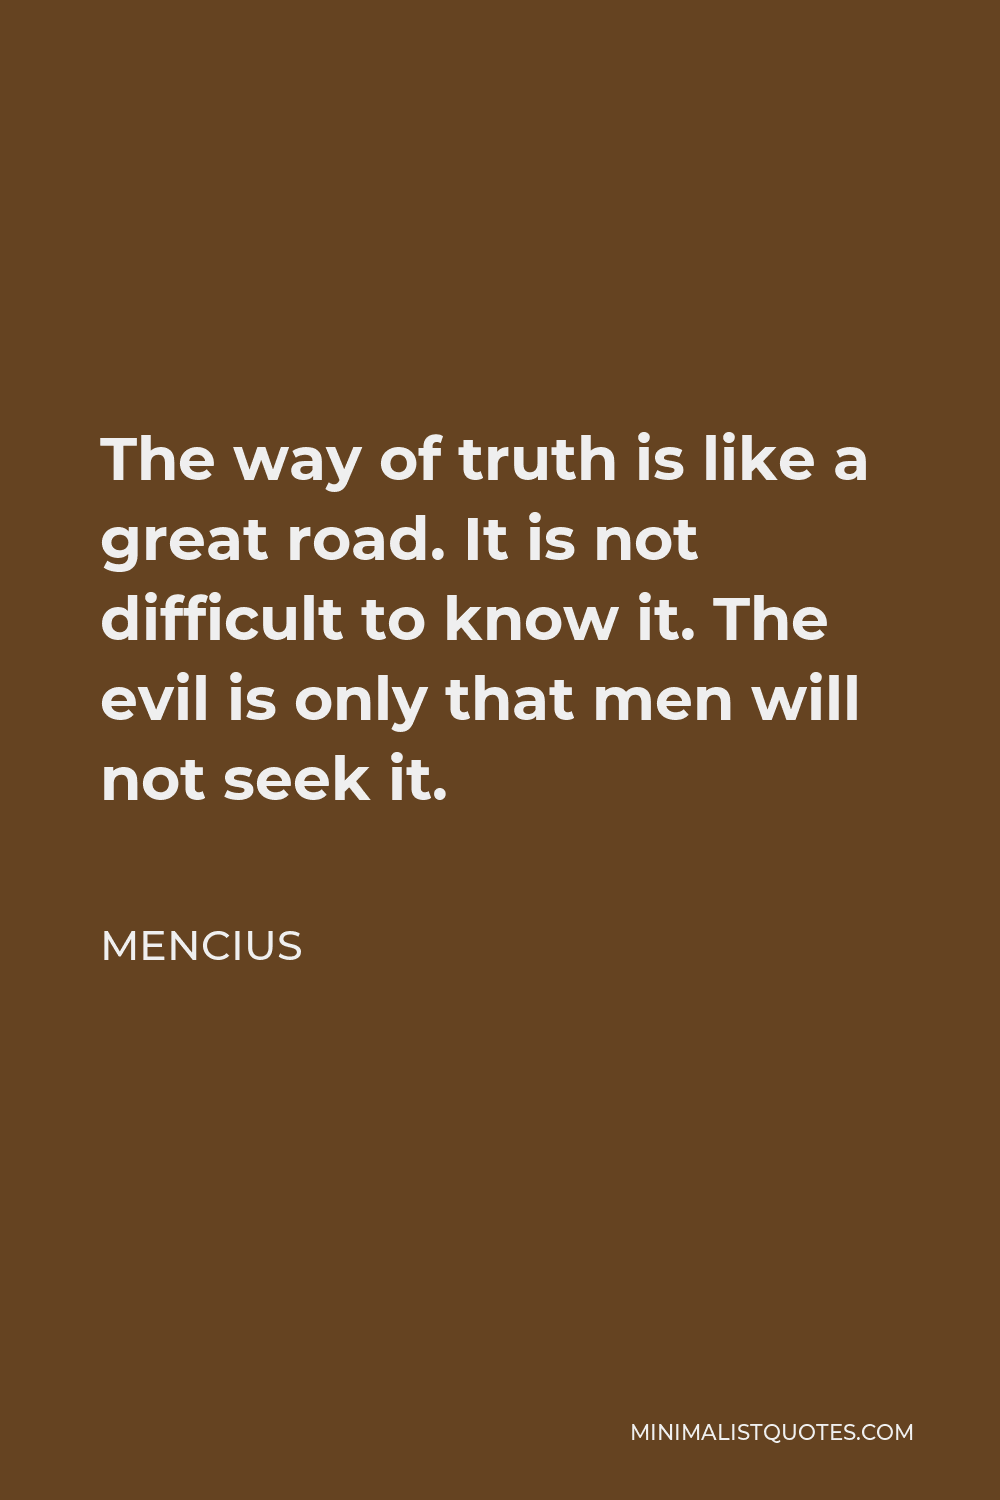 Mencius Quote - The way of truth is like a great road. It is not difficult to know it. The evil is only that men will not seek it.